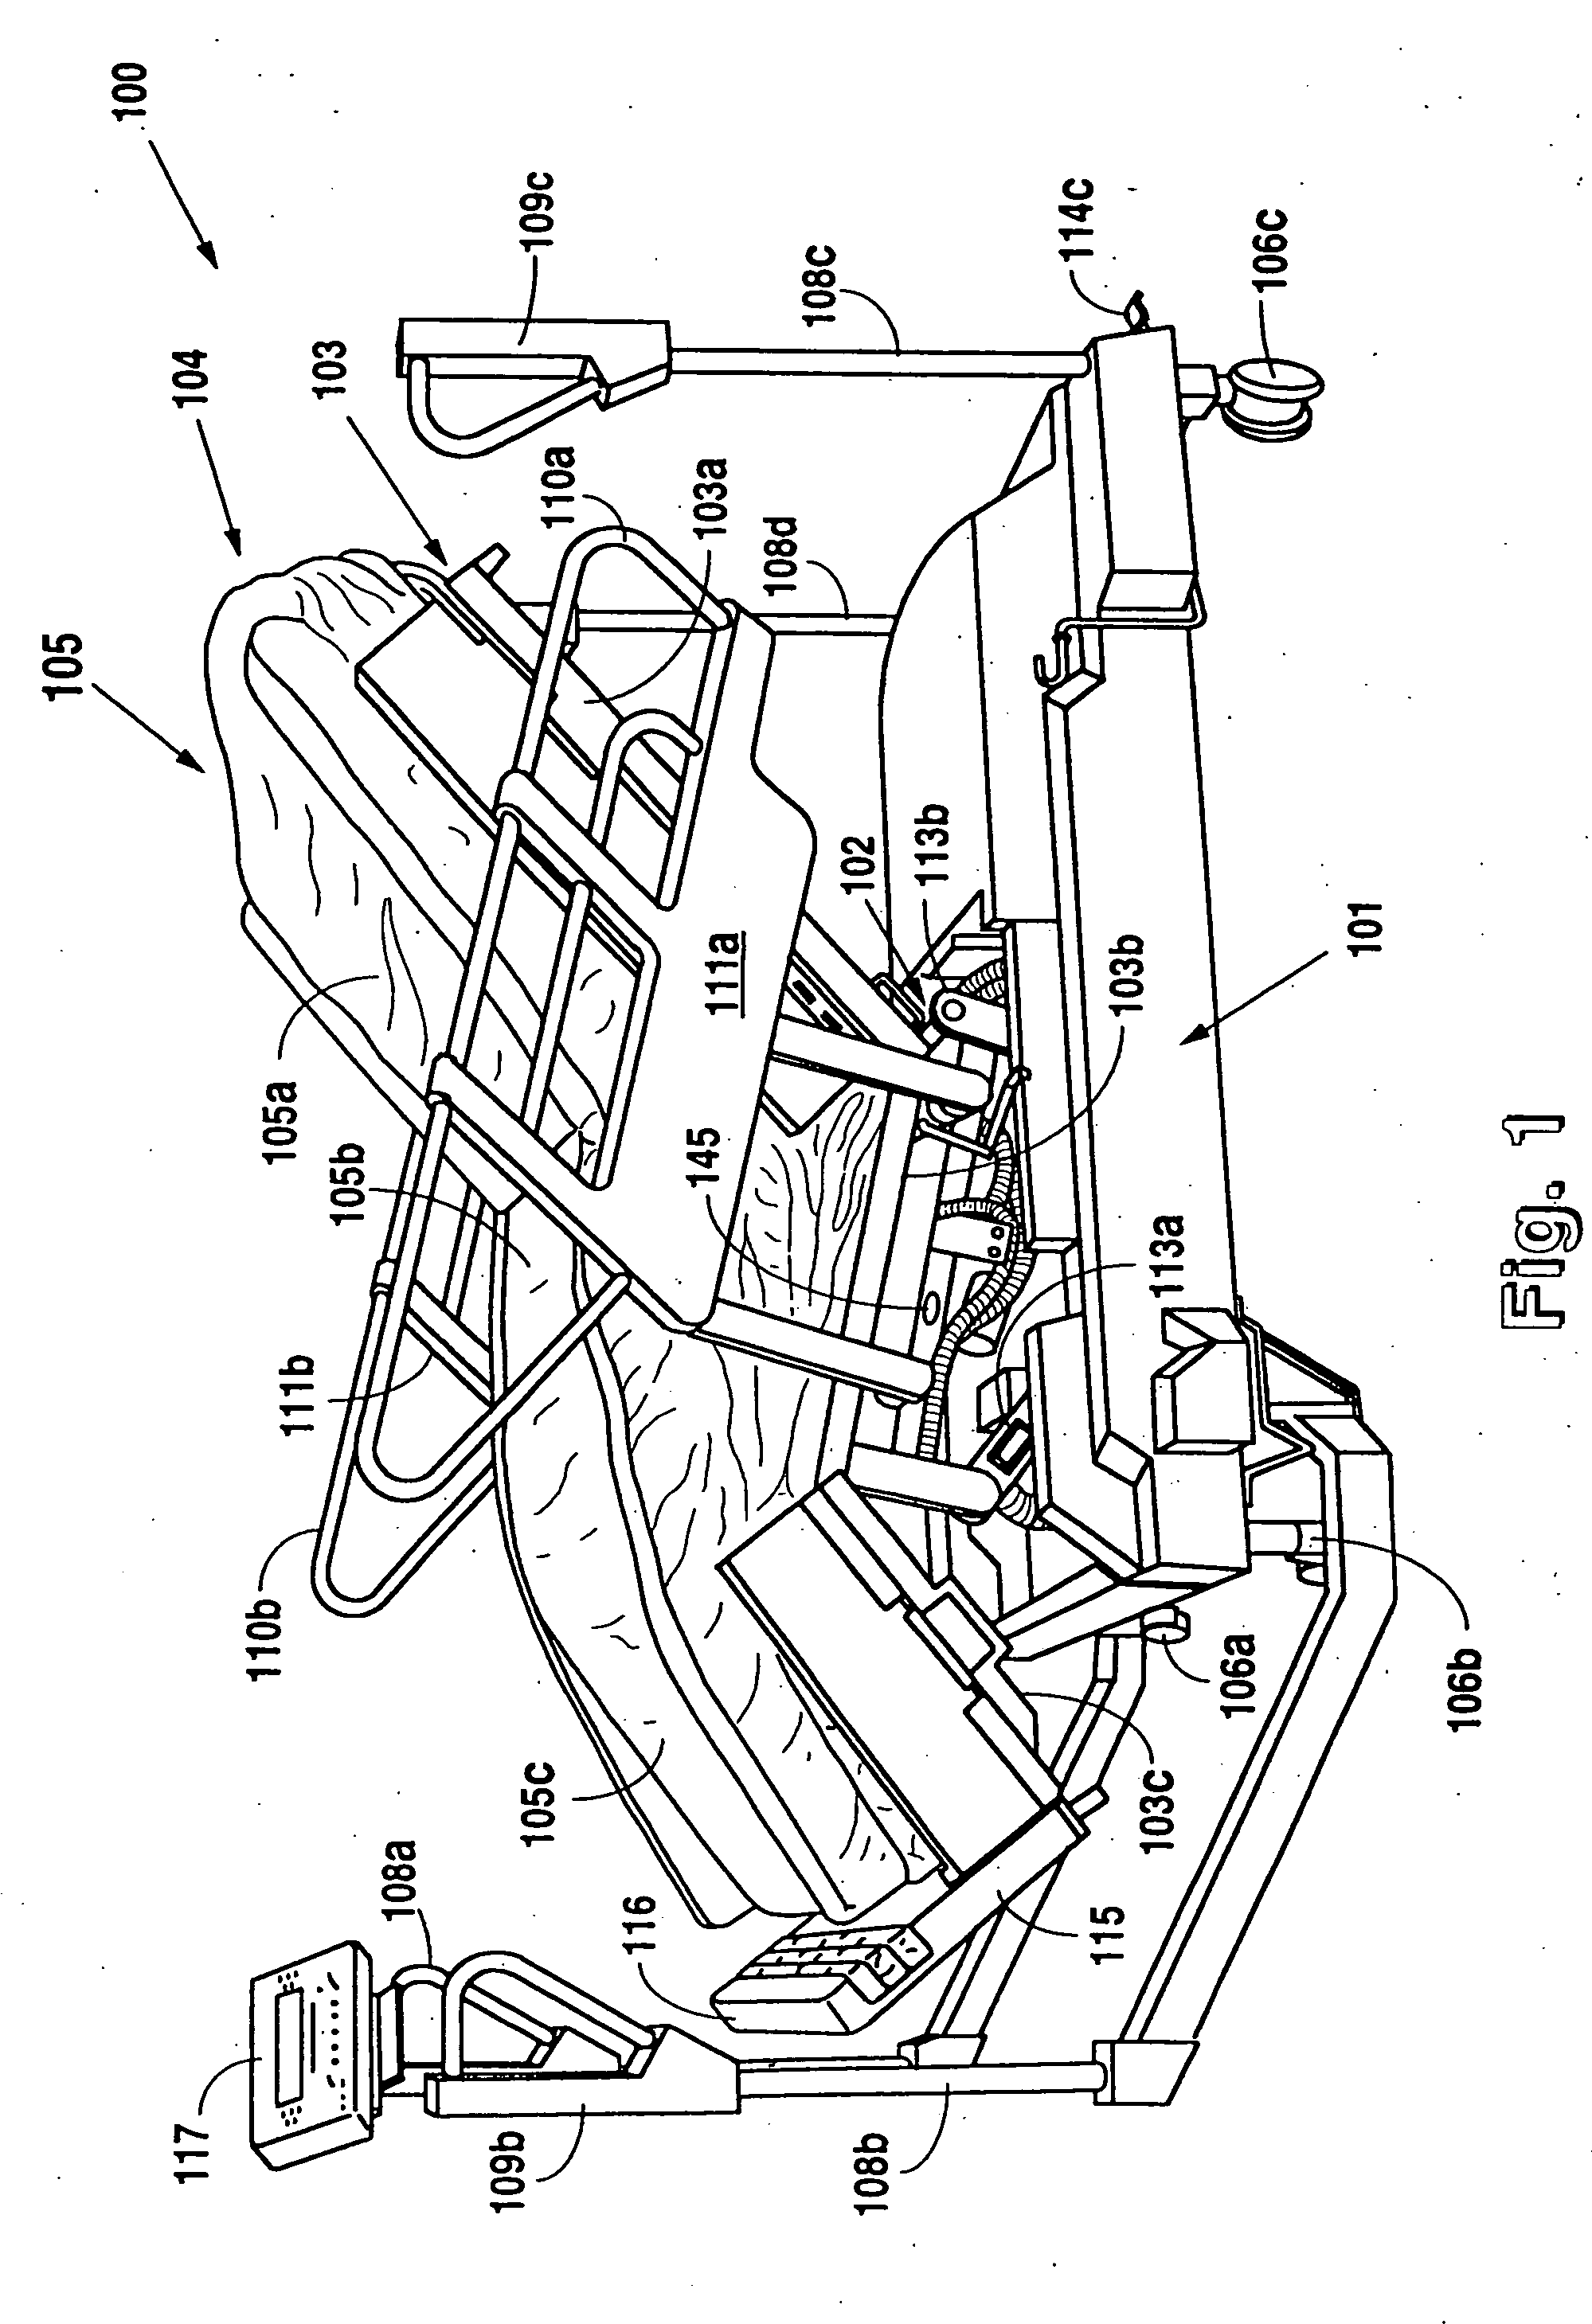 Bariatric treatment system and related methods